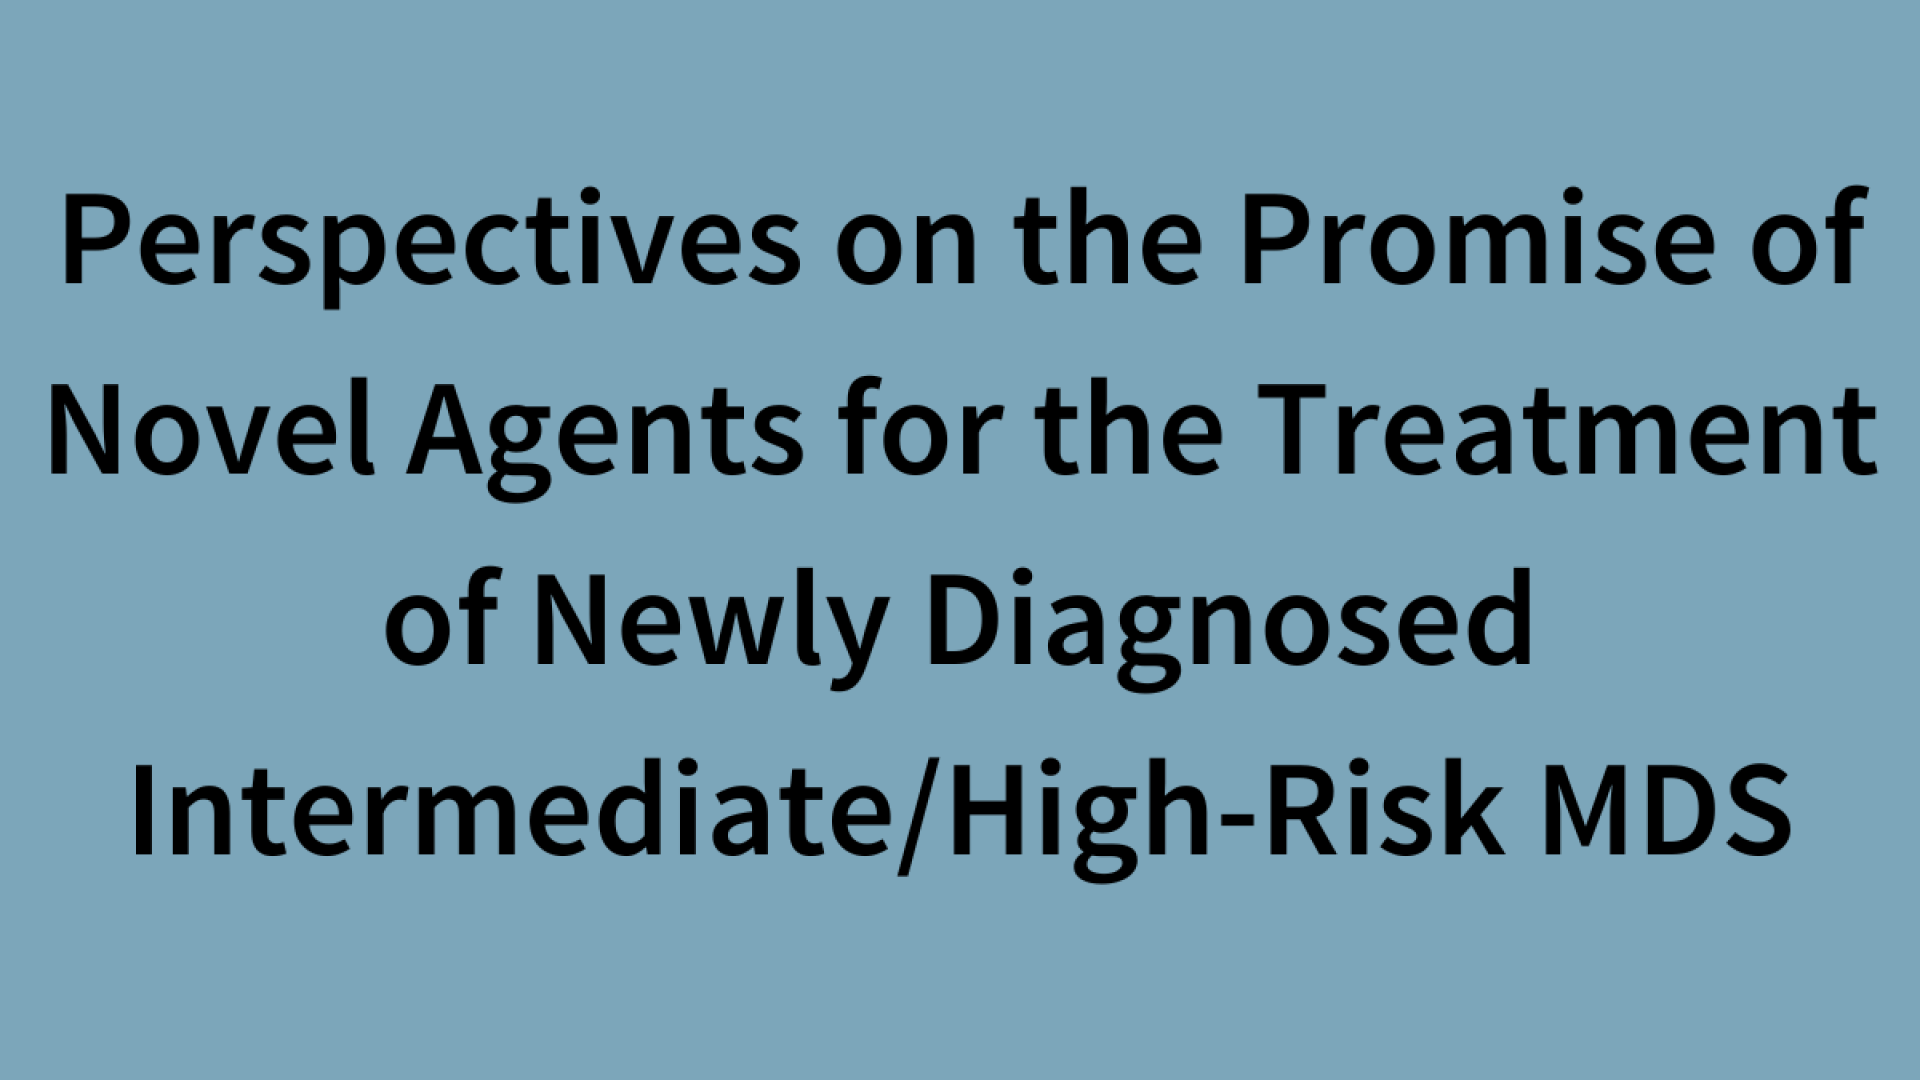 Perspectives on the Promise of Novel Agents for the Treatment of Newly Diagnosed Intermediate/High-Risk M-D-S